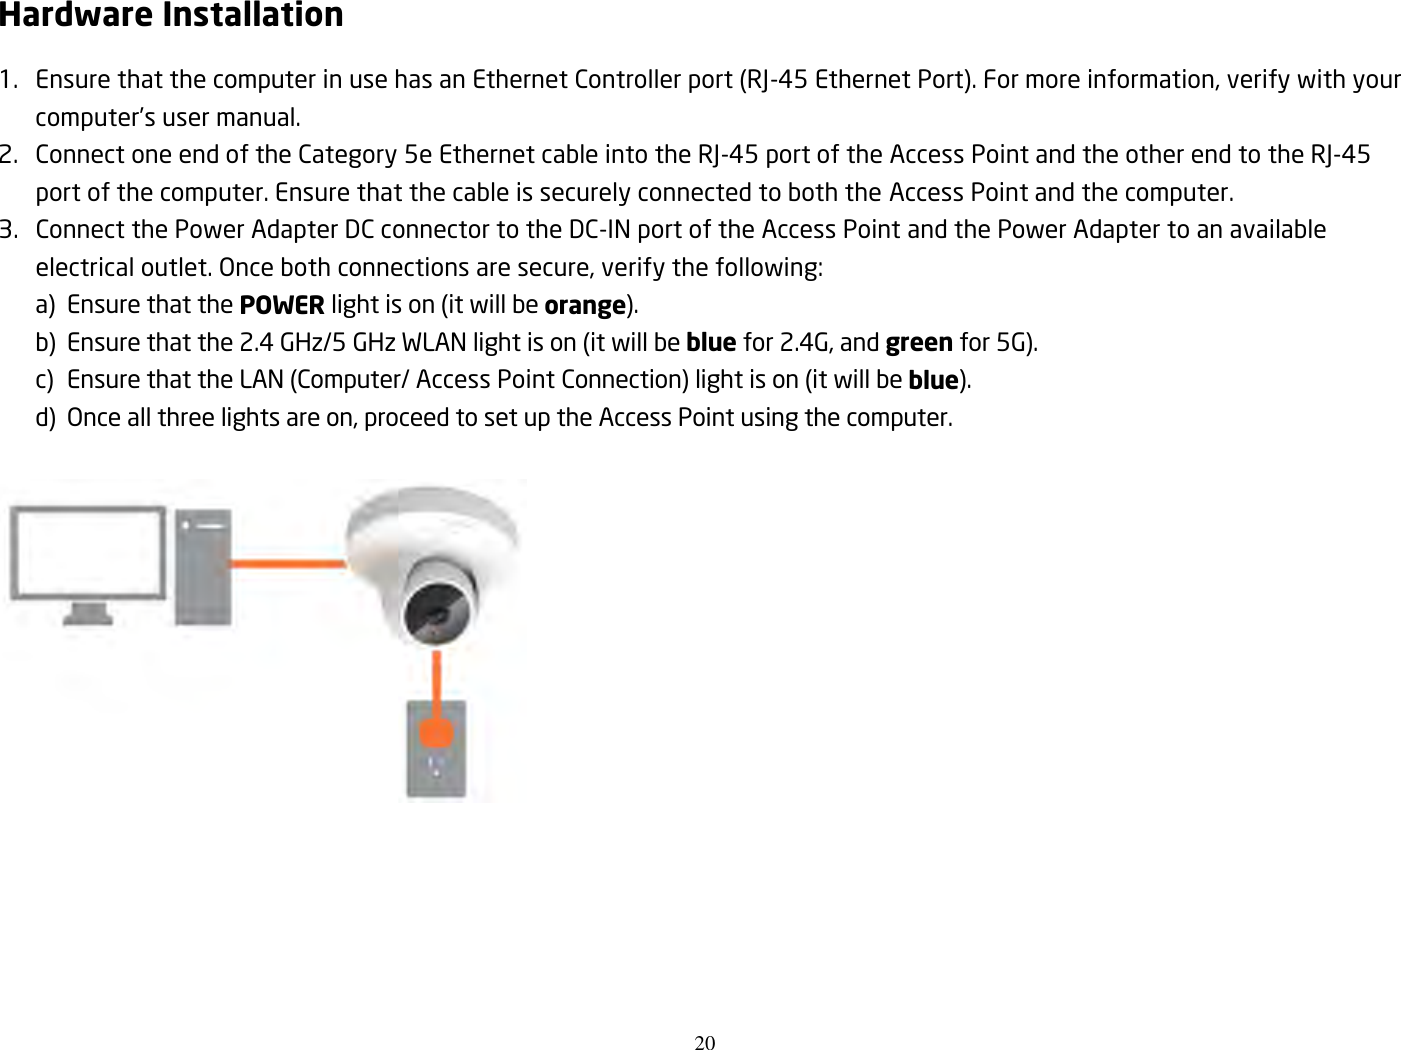 20  Hardware Installation 1. Ensure that the computer in use has an Ethernet Controller port (RJ-45 Ethernet Port). For more information, verify with your computer’s user manual. 2. Connect one end of the Category 5e Ethernet cable into the RJ-45 port of the Access Point and the other end to the RJ-45 port of the computer. Ensure that the cable is securely connected to both the Access Point and the computer. 3. Connect the Power Adapter DC connector to the DC-IN port of the Access Point and the Power Adapter to an available electrical outlet. Once both connections are secure, verify the following:     a)  Ensure that the POWER light is on (it will be orange).     b)  Ensure that the 2.4 GHz/5 GHz WLAN light is on (it will be blue for 2.4G, and green for 5G).     c)  Ensure that the LAN (Computer/ Access Point Connection) light is on (it will be blue).     d)  Once all three lights are on, proceed to set up the Access Point using the computer.    